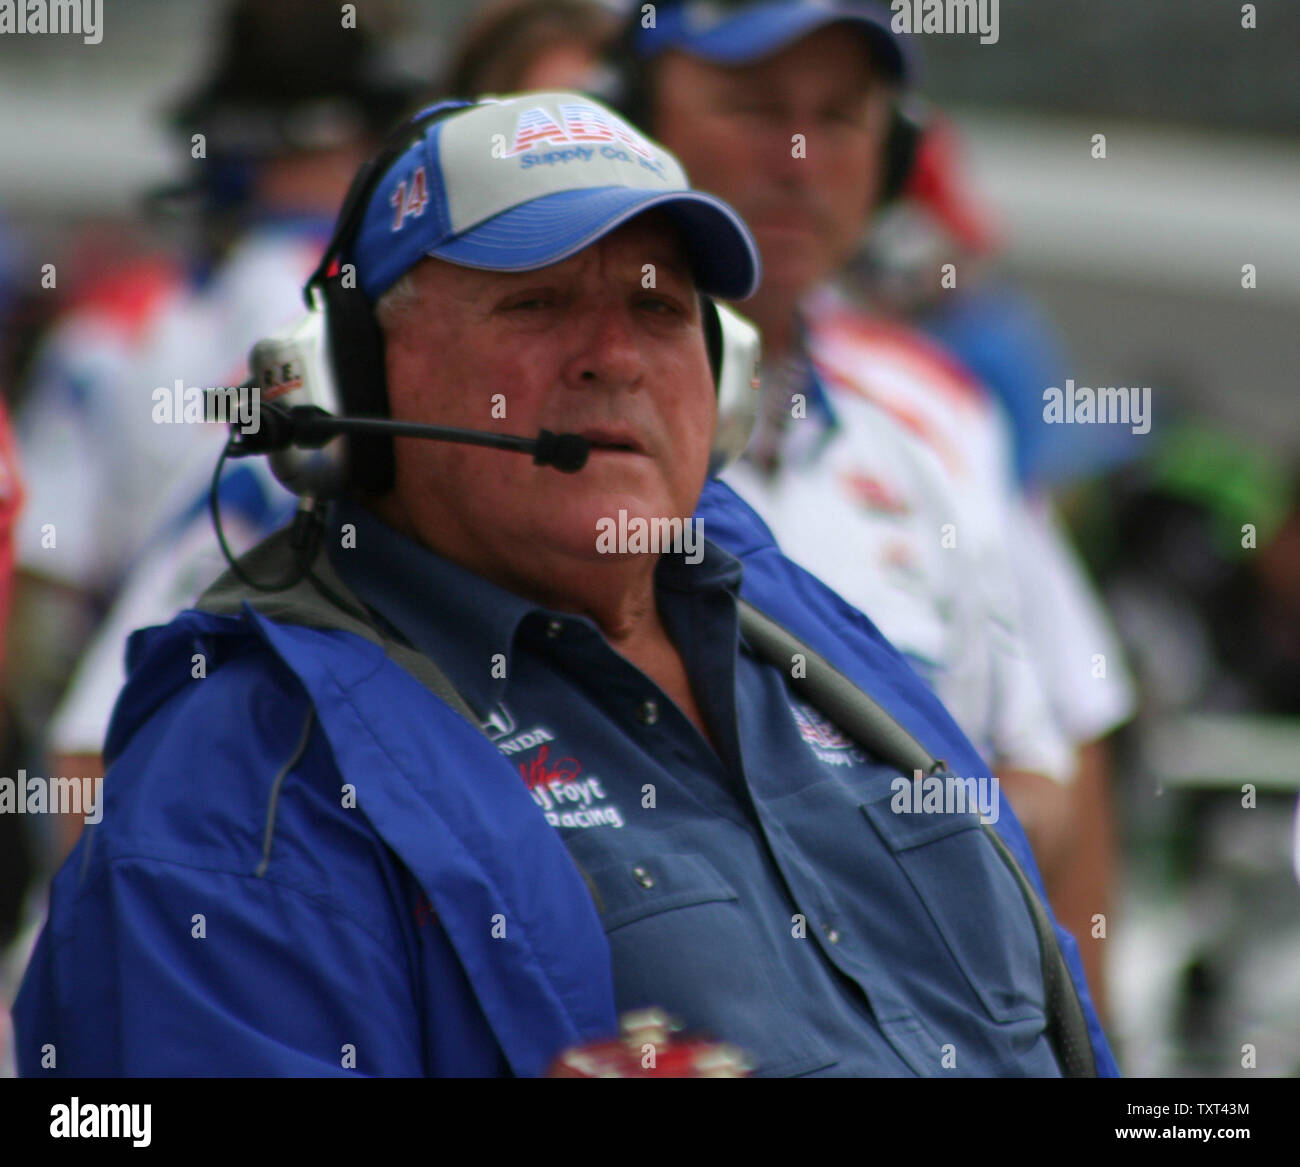 4 time Indianapolis 500 winner AJ Foyt talks to his driver Vitor Meira on May 19, 2011 at the Indianapolis Motor Speedway in Indianapolis, Indiana.     UPI Photo/ Dennis Daddow Stock Photo